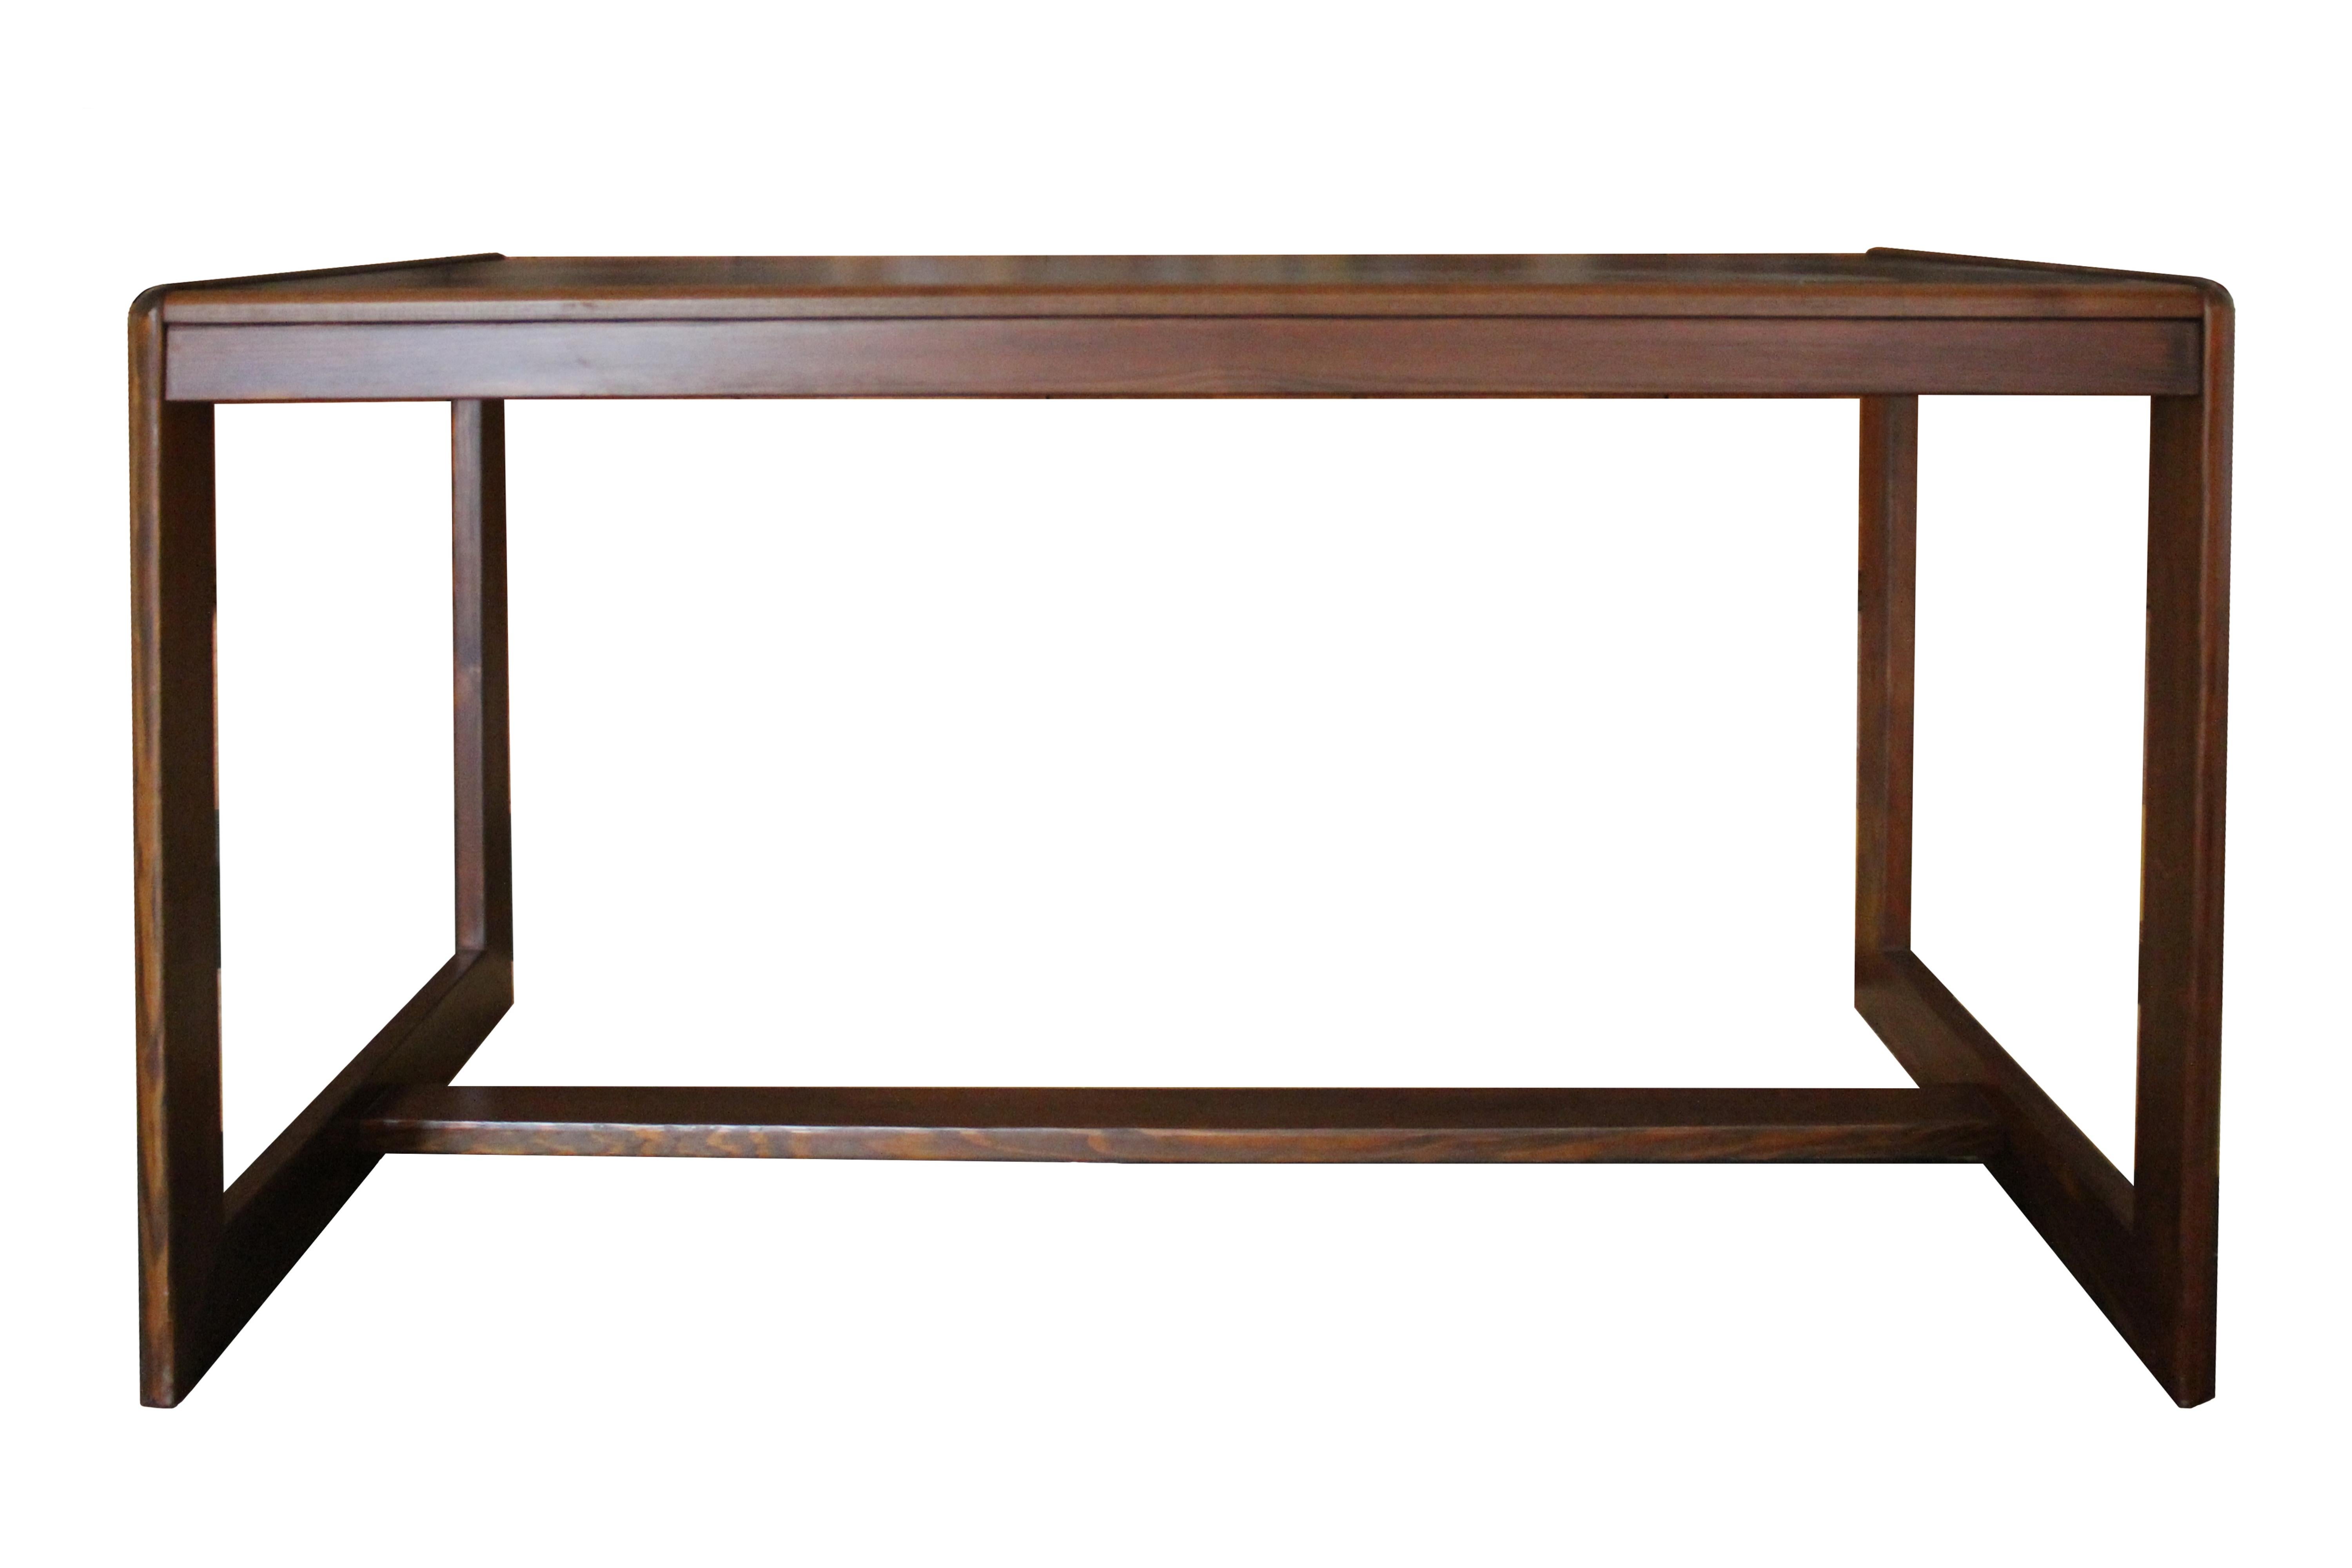 André Sornay Desk.
Made with Elm and black lacquered top.
Circa 1960, France.
André Sornay, born in Lyon on January 28, 1902 and died on August 7, 2000 in Vichy, is a French designer and decorator, representative of the Art Deco style in France.